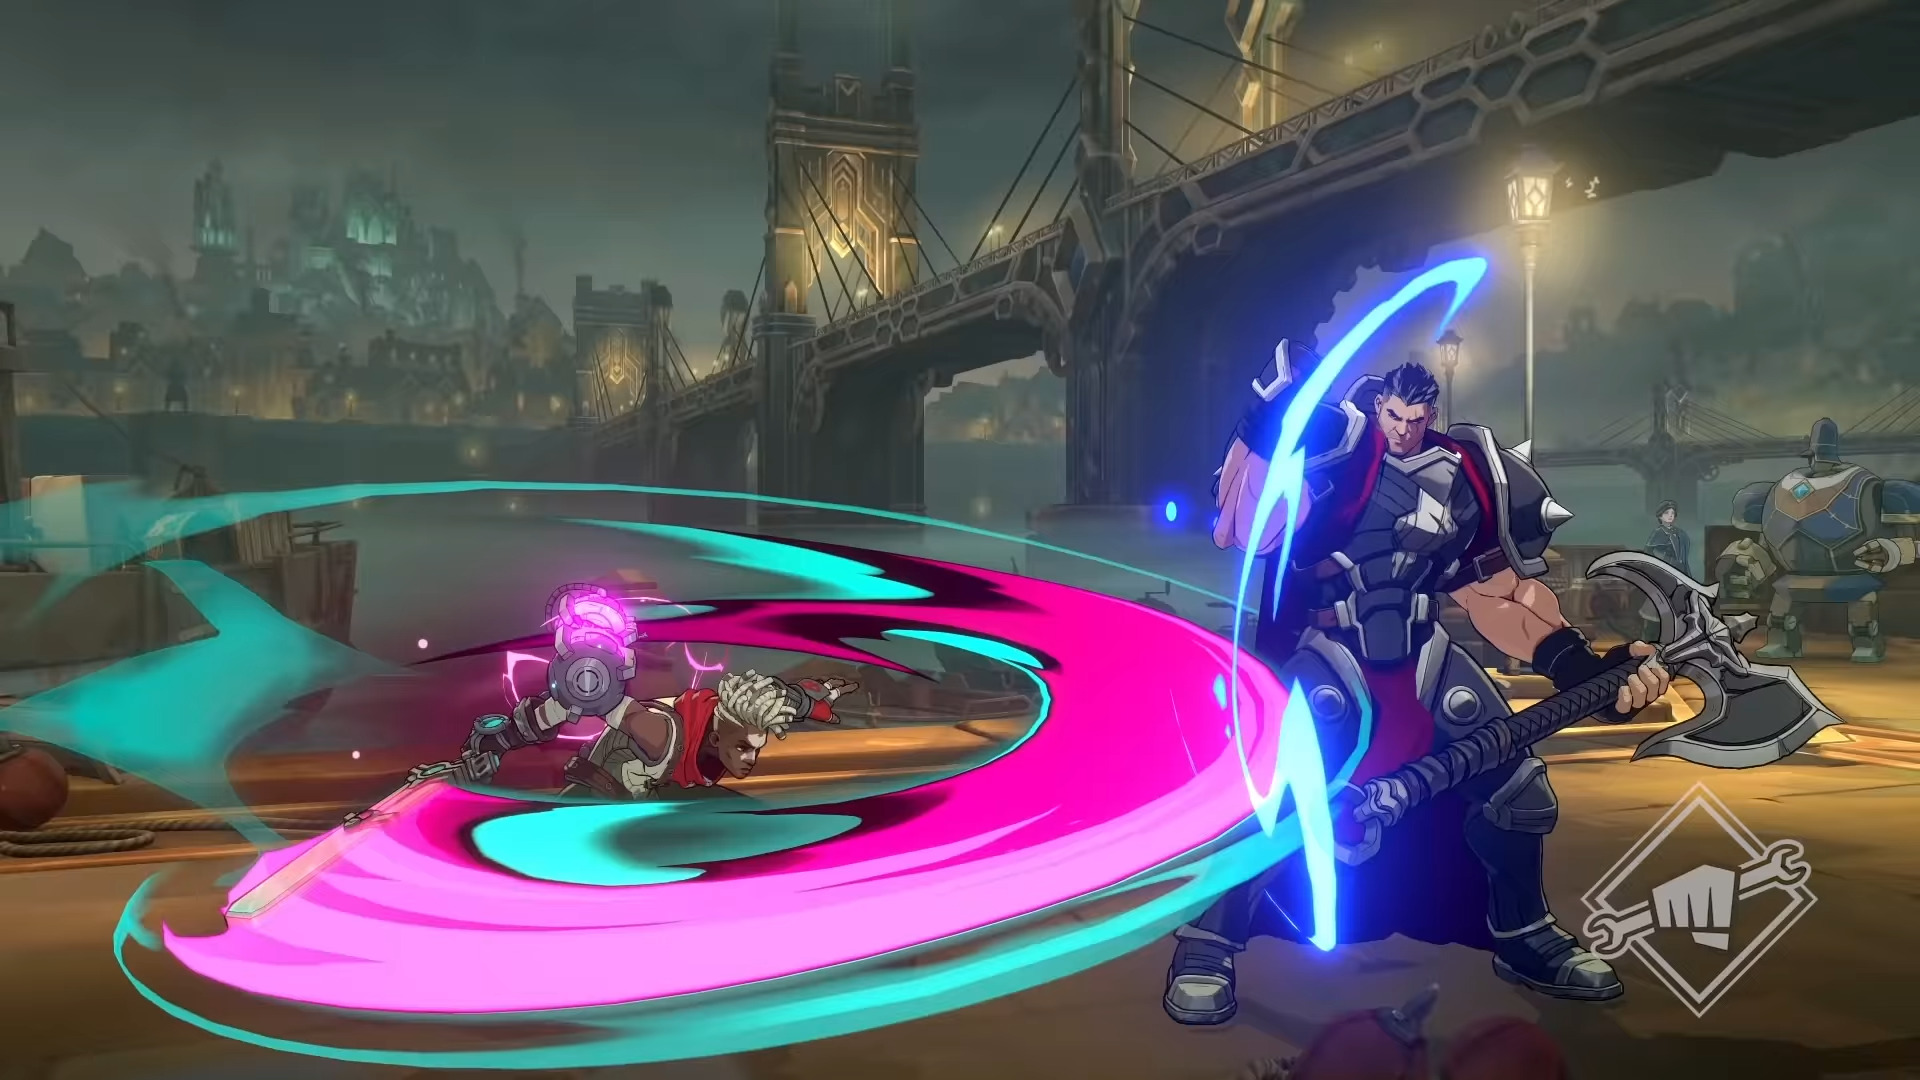 A new look at Project L, the League of Legends fighting game